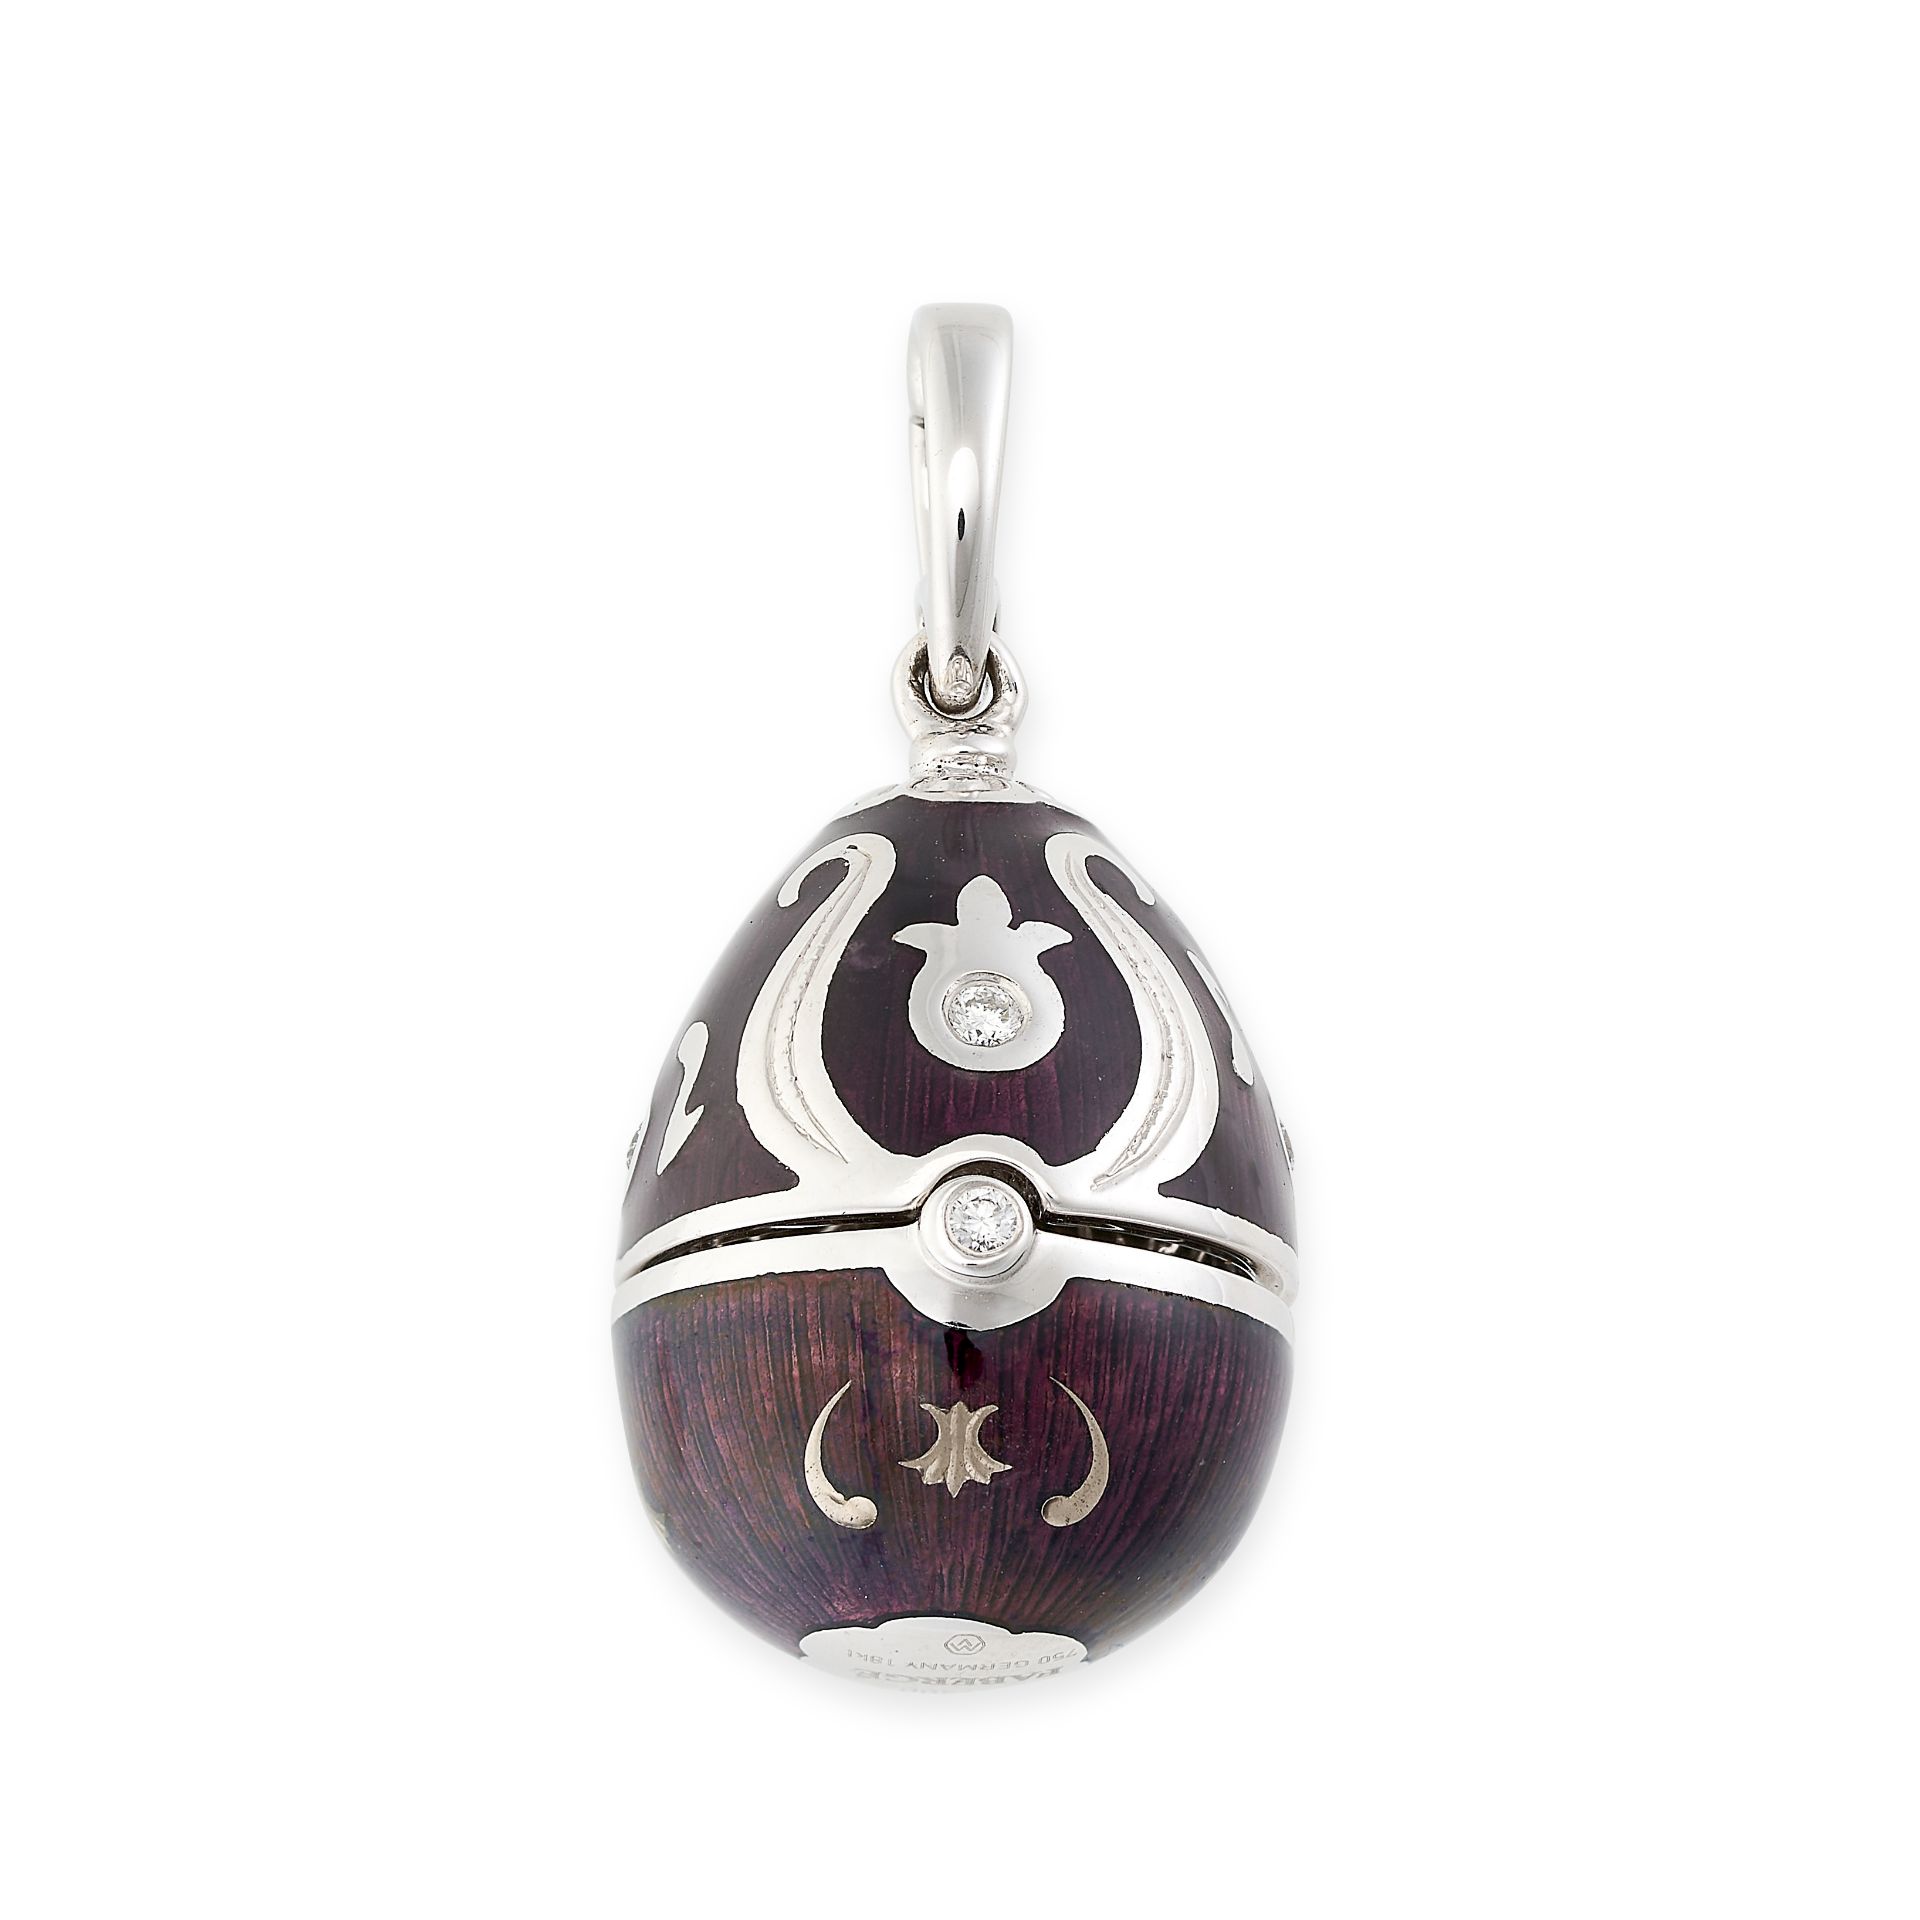 FABERGE, AN ENAMEL AND DIAMOND EGG CHARM / PENDANT in 18ct white gold, designed as a hinged egg